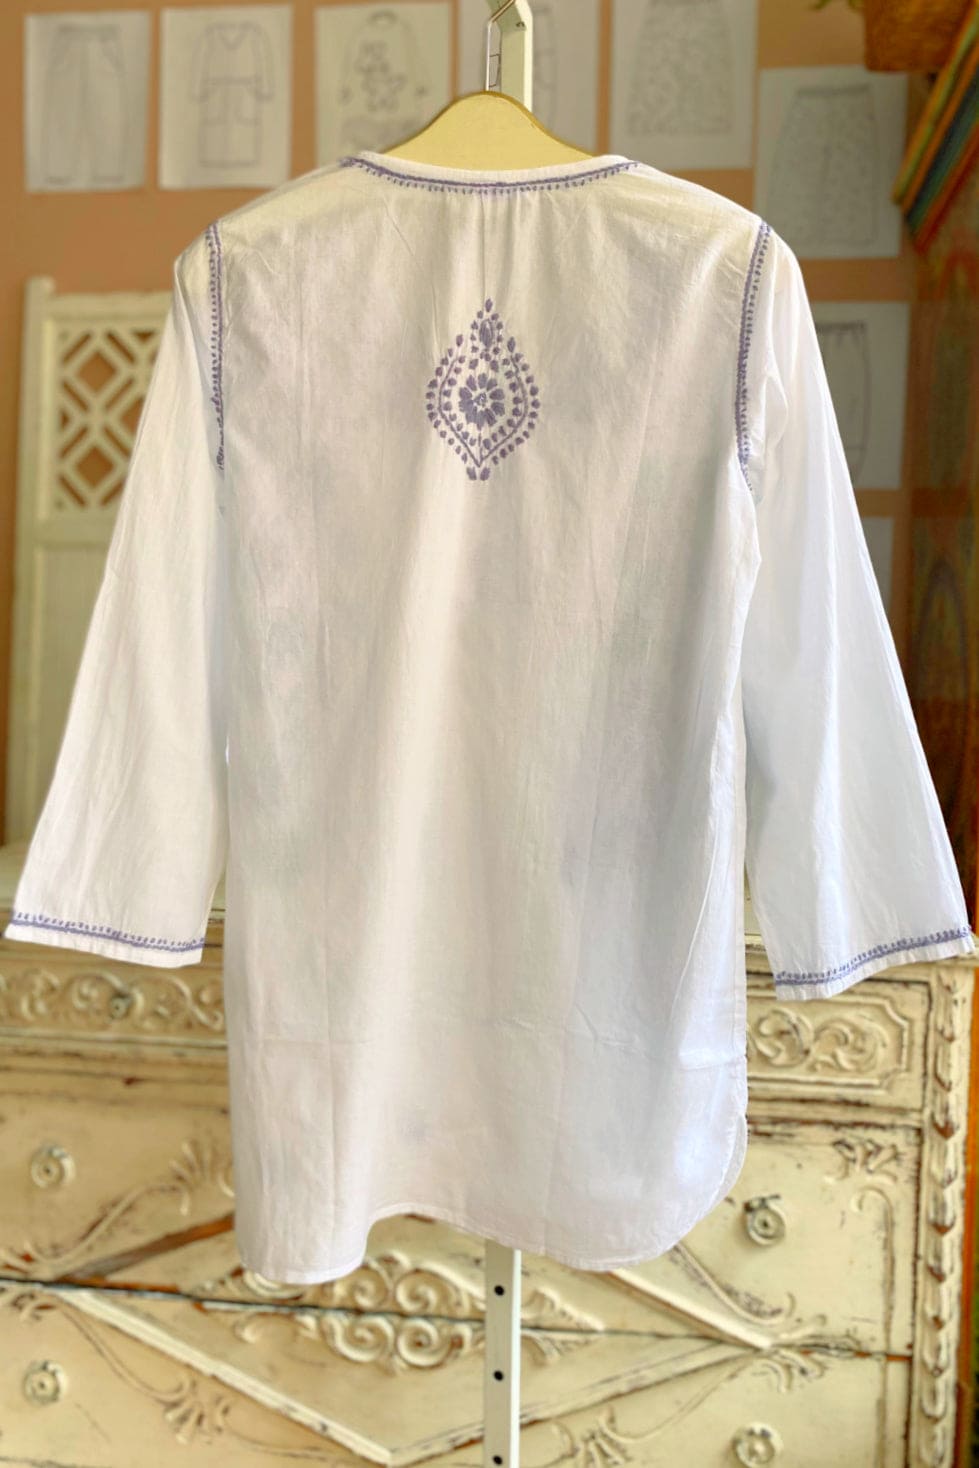 Back view of blue stitched cotton tunic